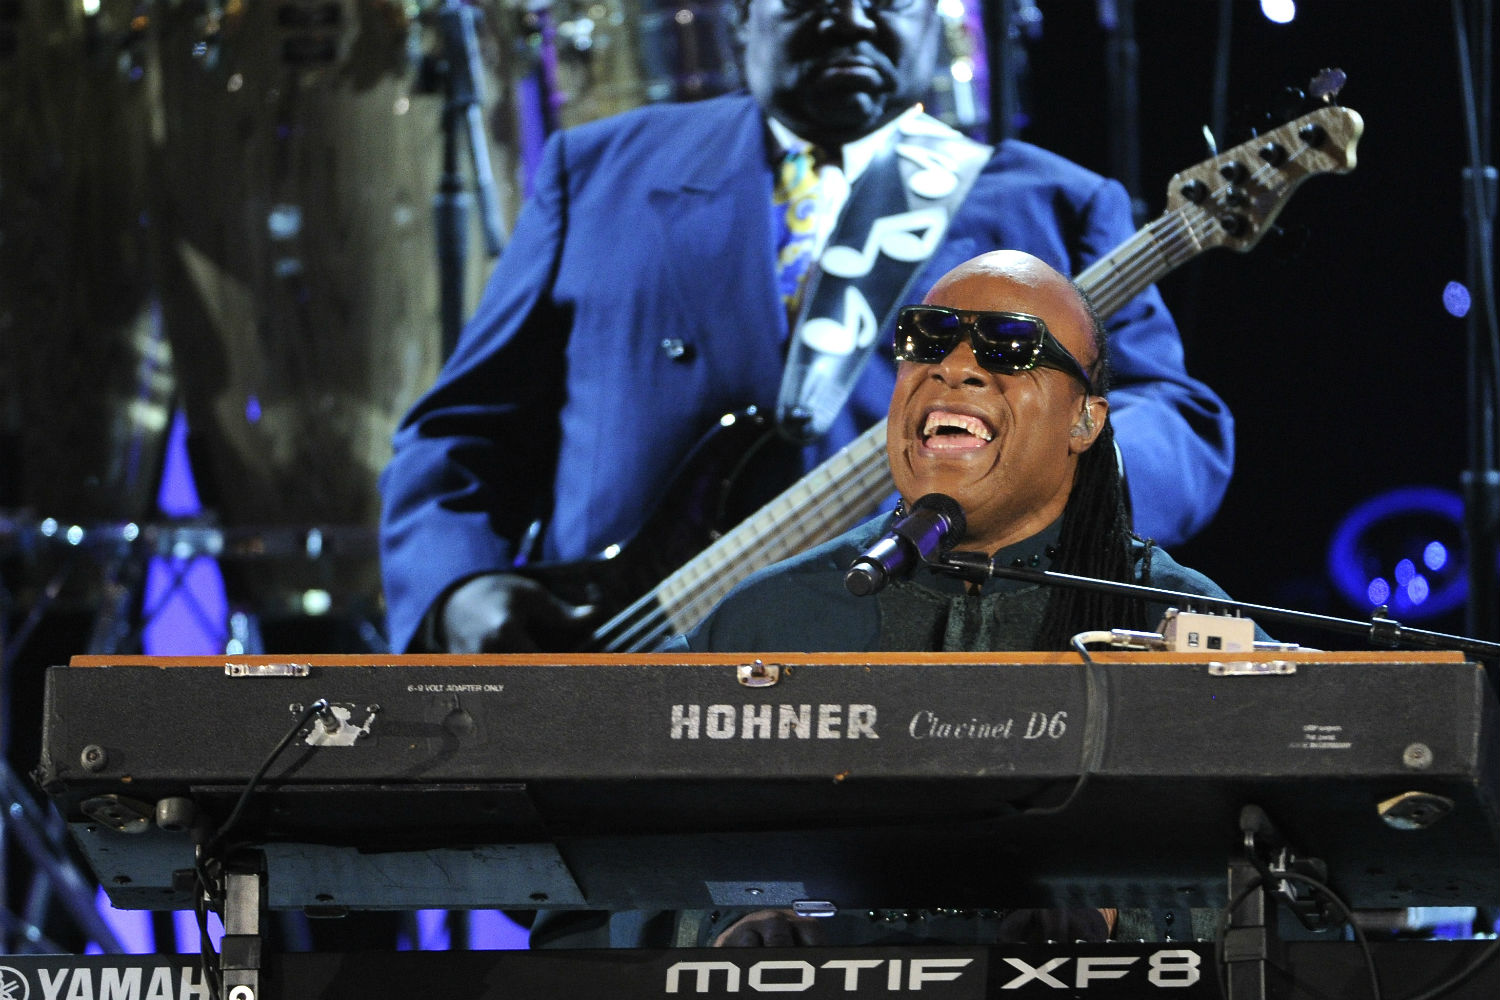 Does Stevie Wonder, seen here in February 2014, even know he has a potent strain of marijuana named after him? (Chris Pizzello, Invision/AP)